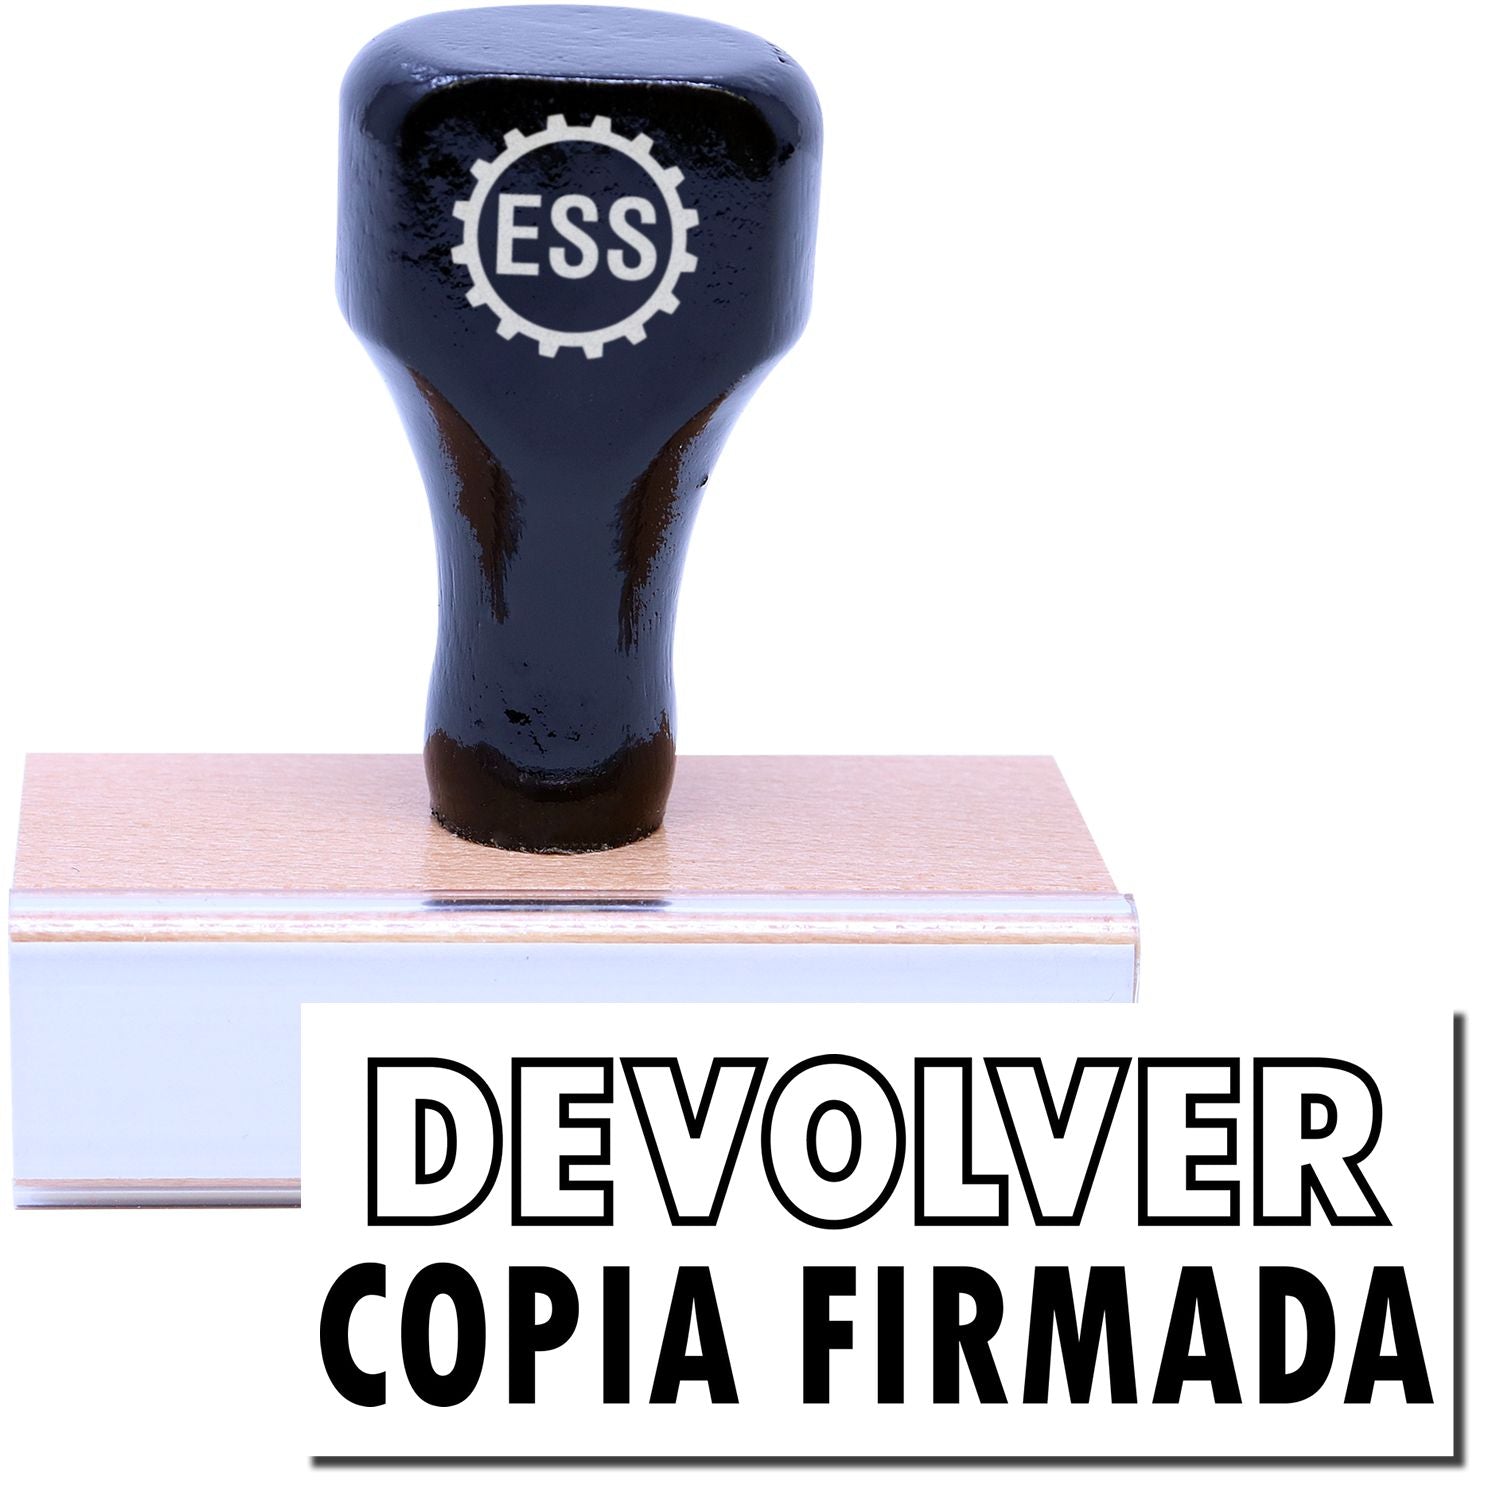 A stock office rubber stamp with a stamped image showing how the text "DEVOLVER COPIA FIRMADA" ("DEVOLVER" in an outline font) is displayed after stamping.